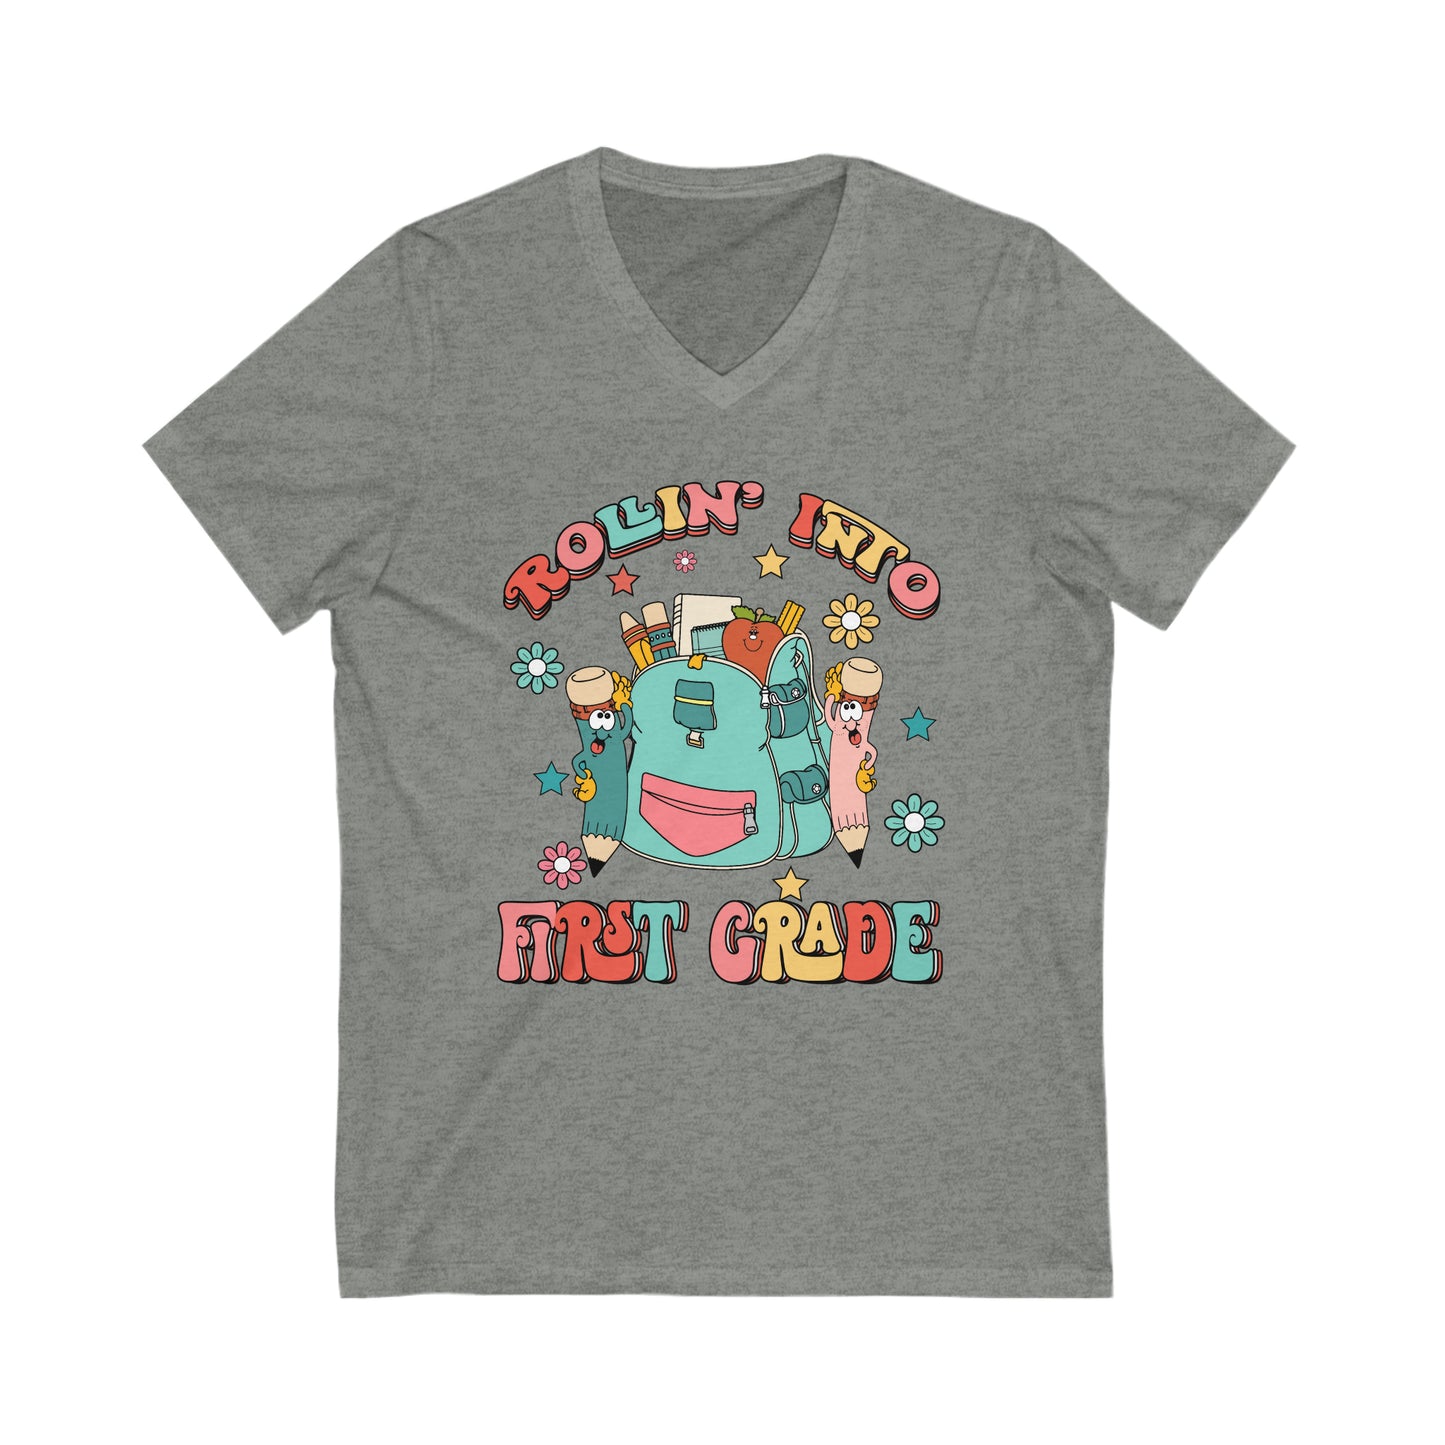 Rollin' Into First Grade Tee